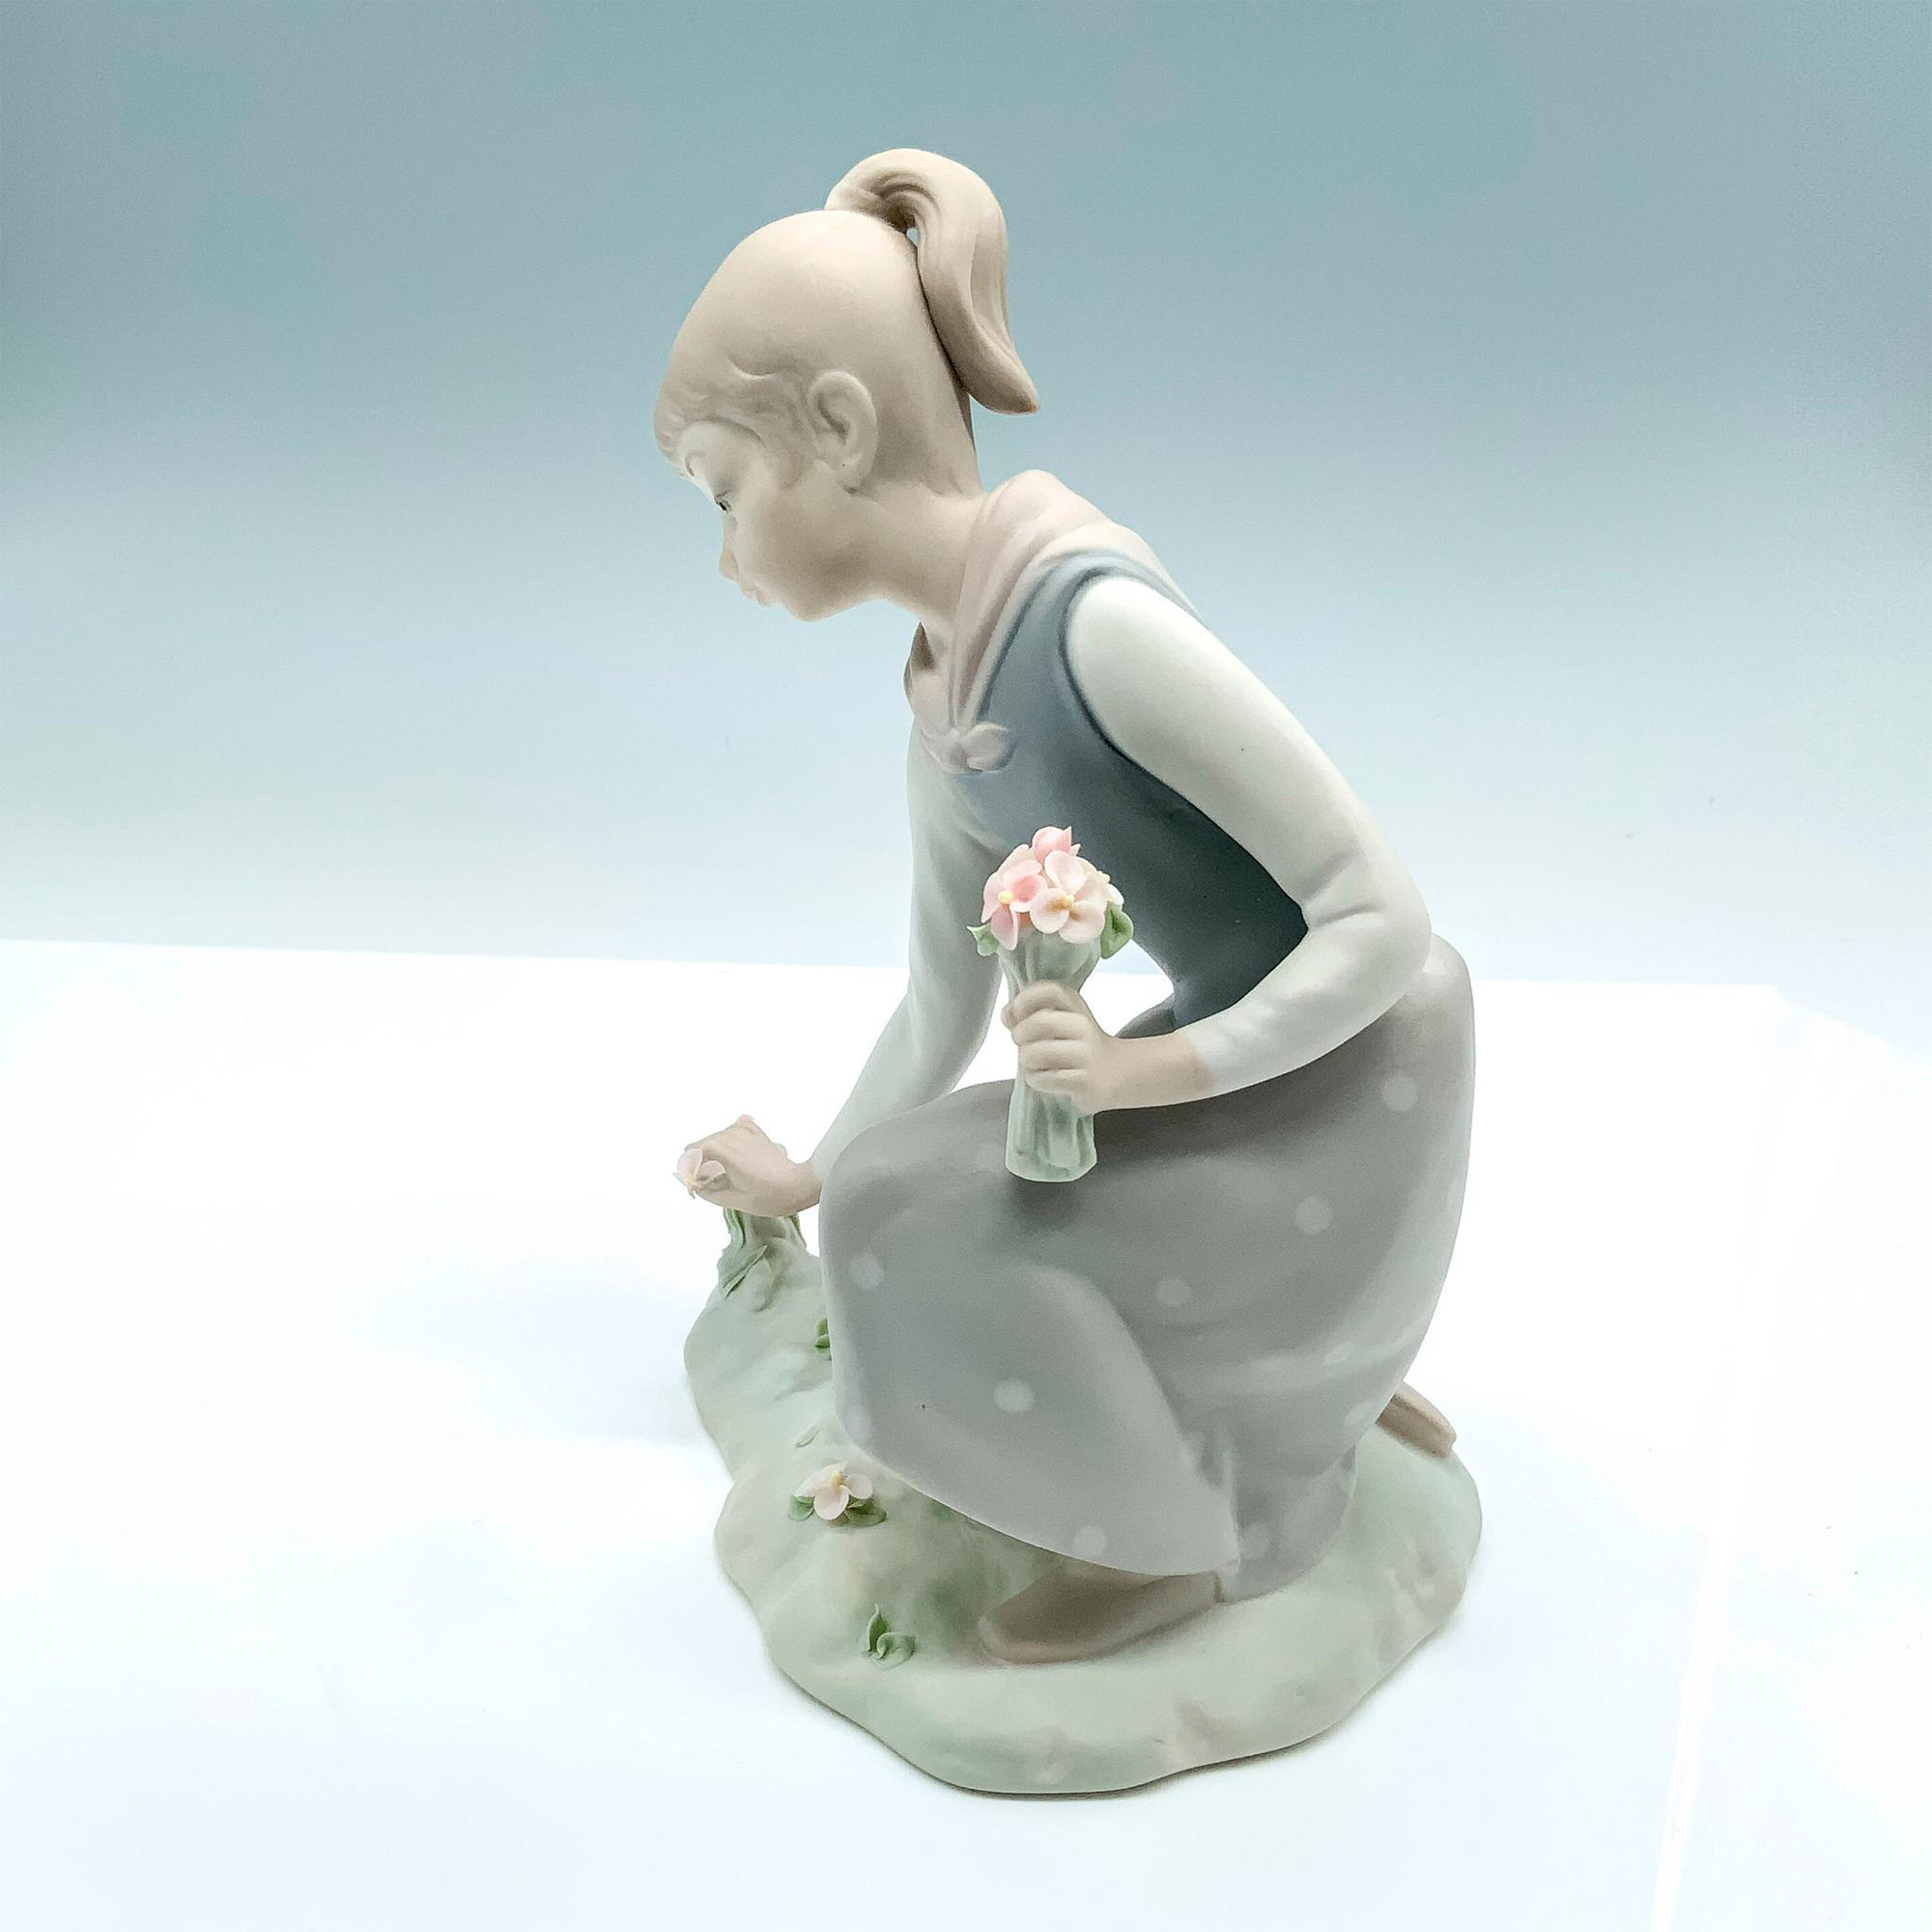 Girl With Flowers 1011172 - Lladro Porcelain Figurine - Image 2 of 5